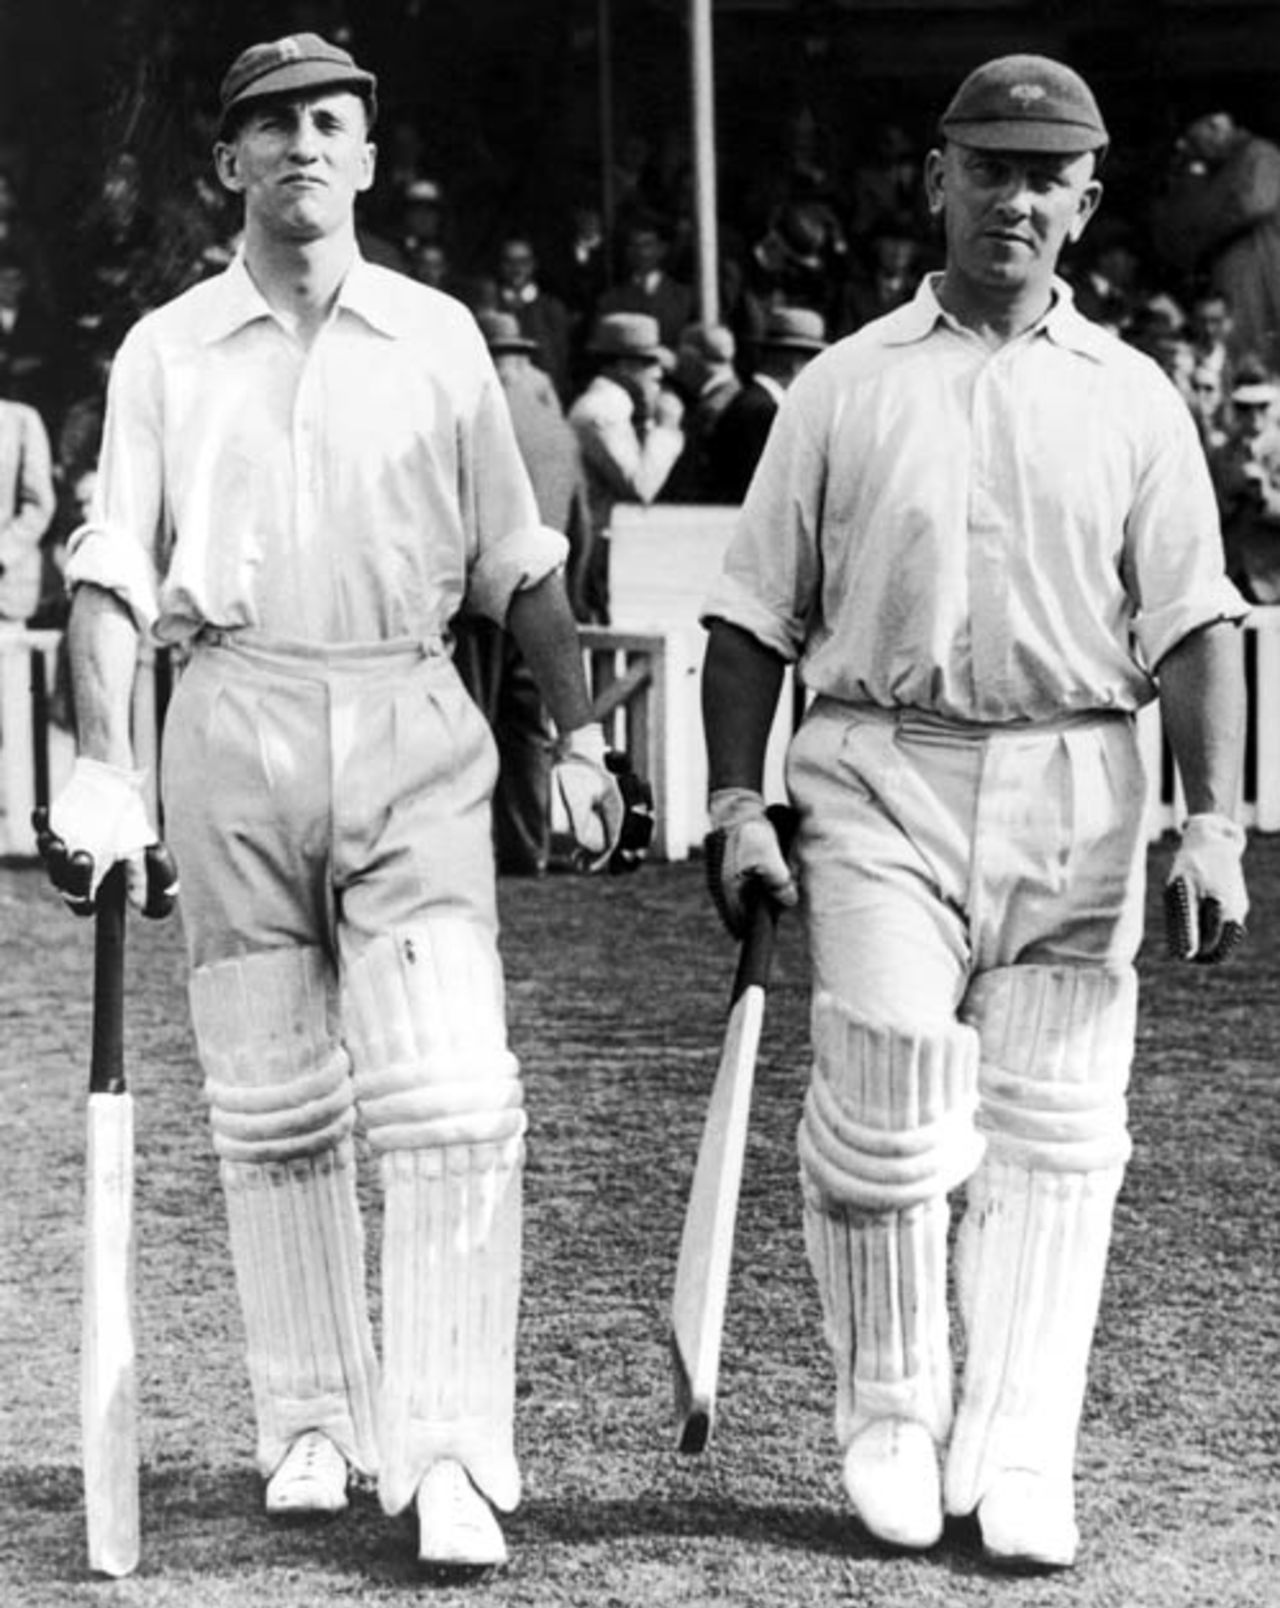 Len Hutton and Maurice Leyland scored unbeaten centuries, England v Australia, 5th Test, The Oval, 1st day, August 20, 1938